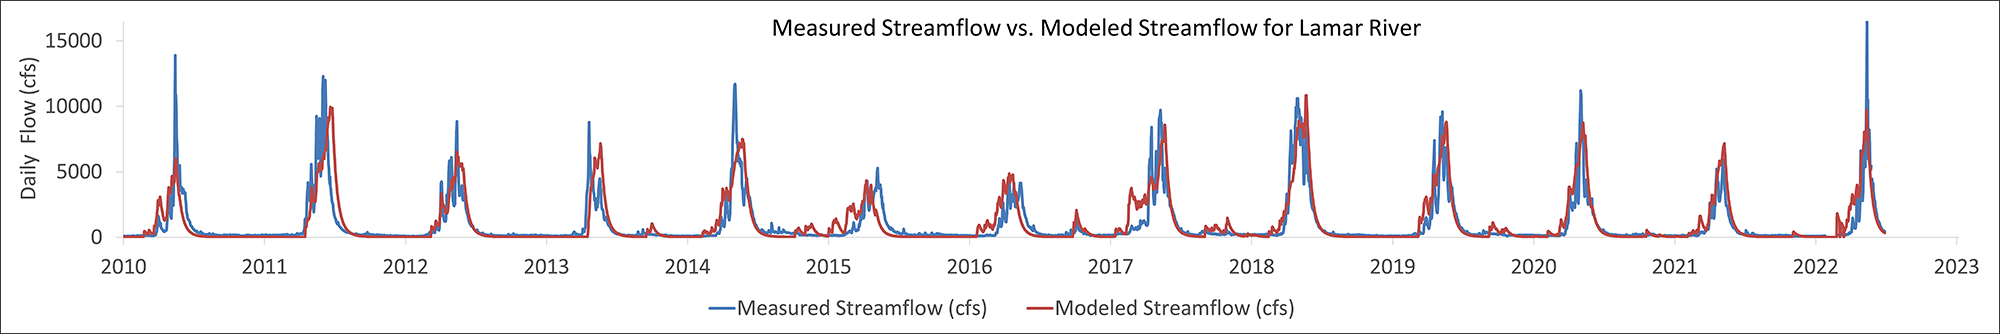 A graph of measured versus modeled streamflow for the Lamar River.